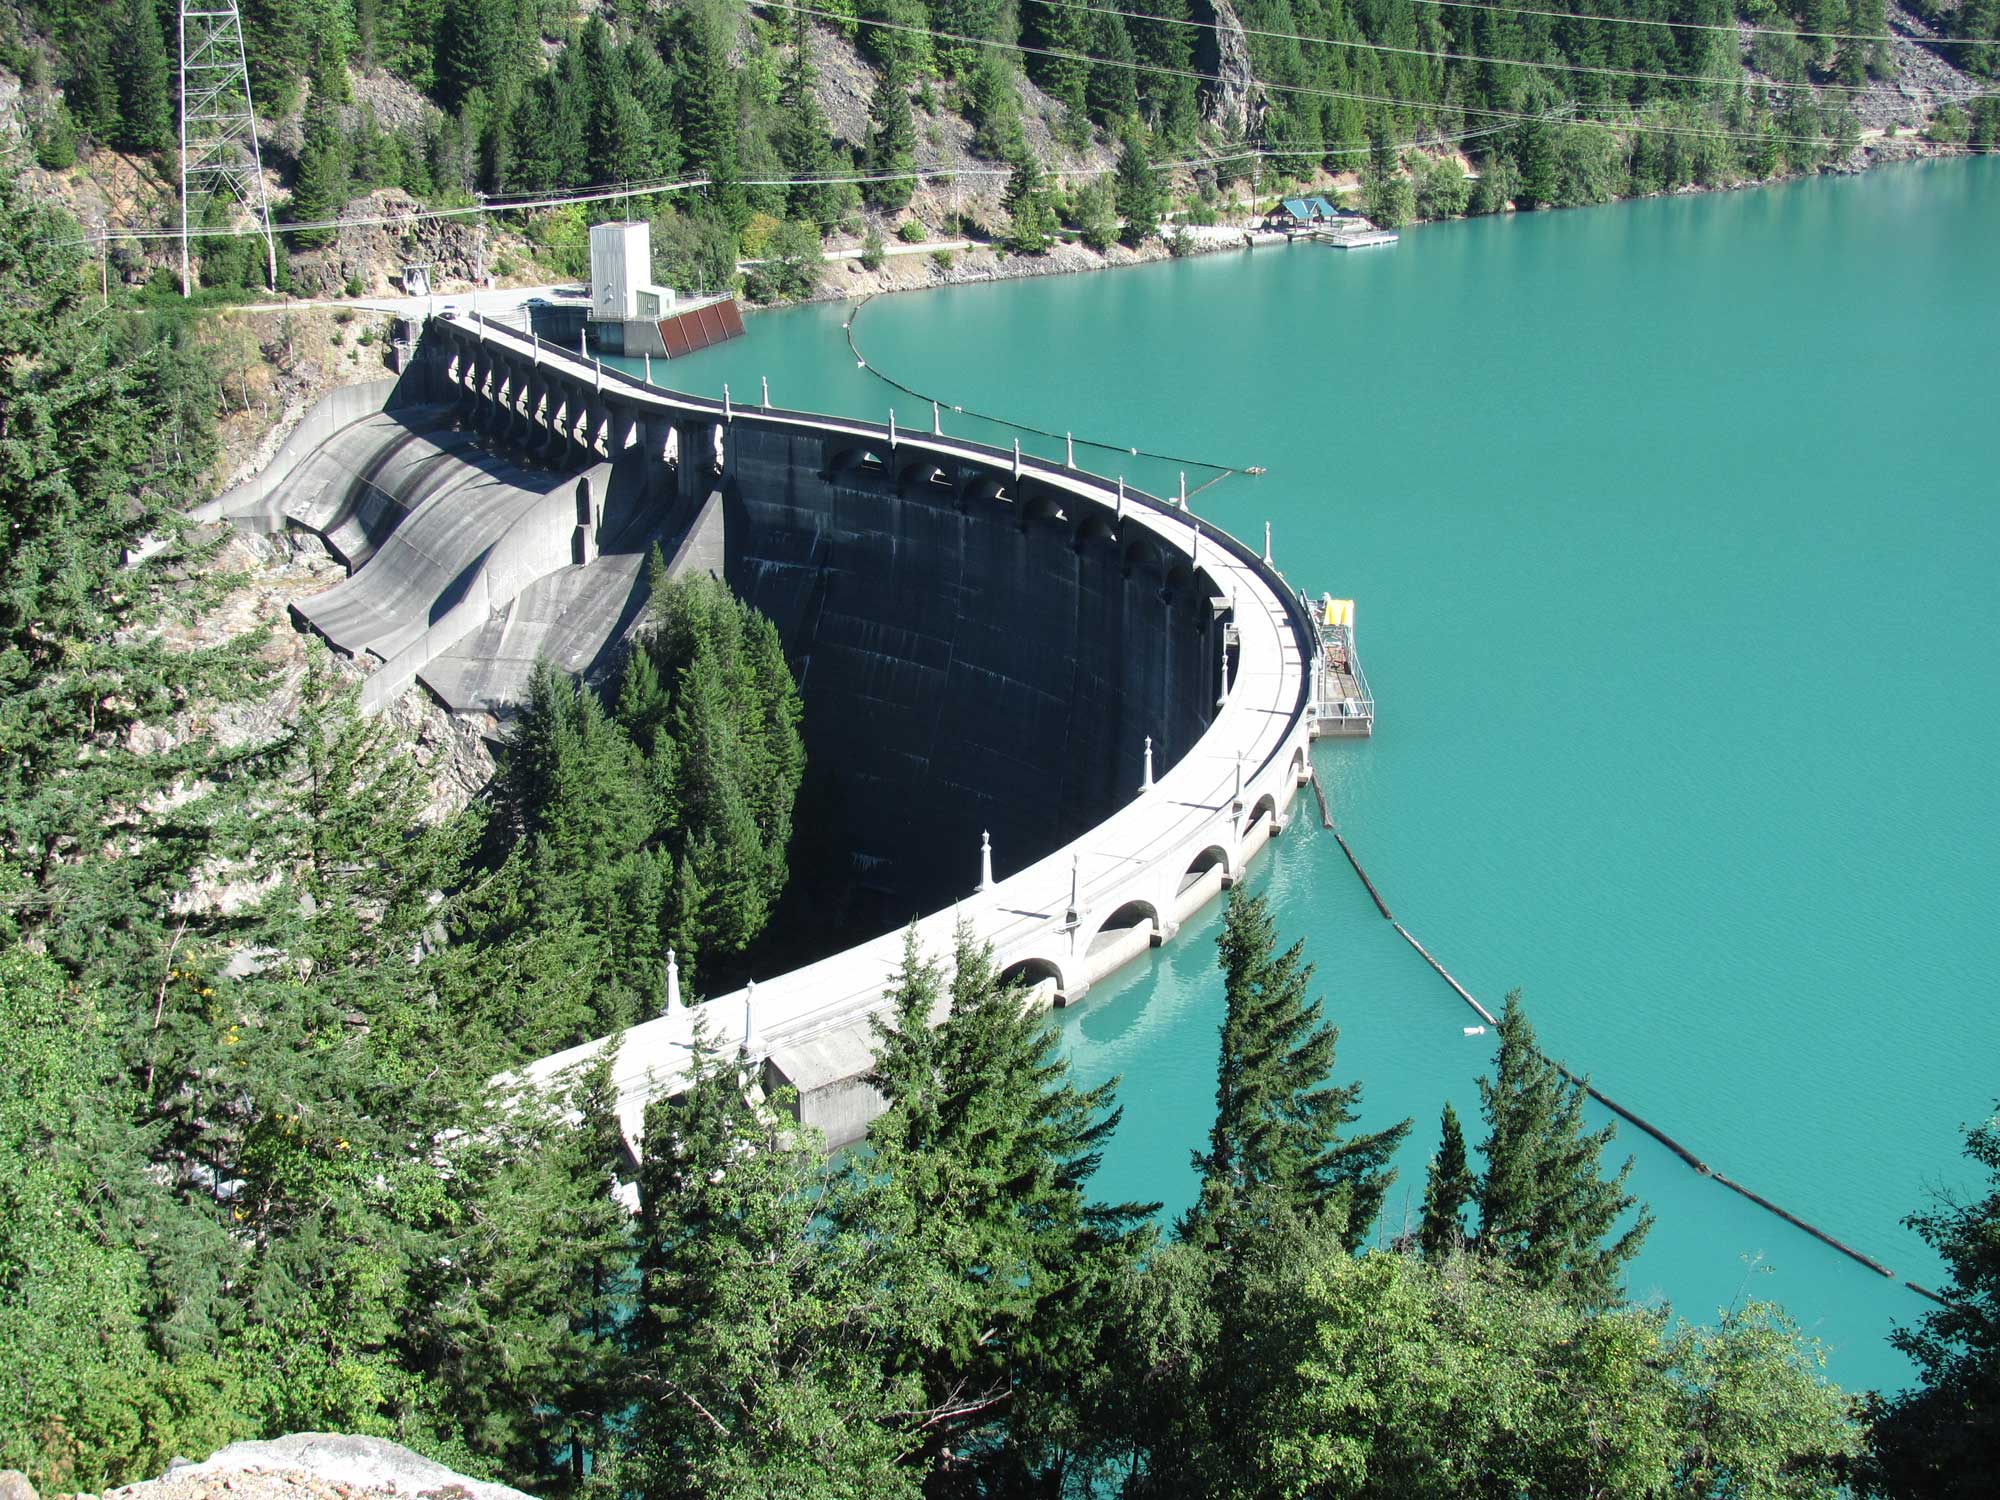 Photograph of Diablo Dam in northwestern Washington state. The photo shows the dam holding back blue-green water.